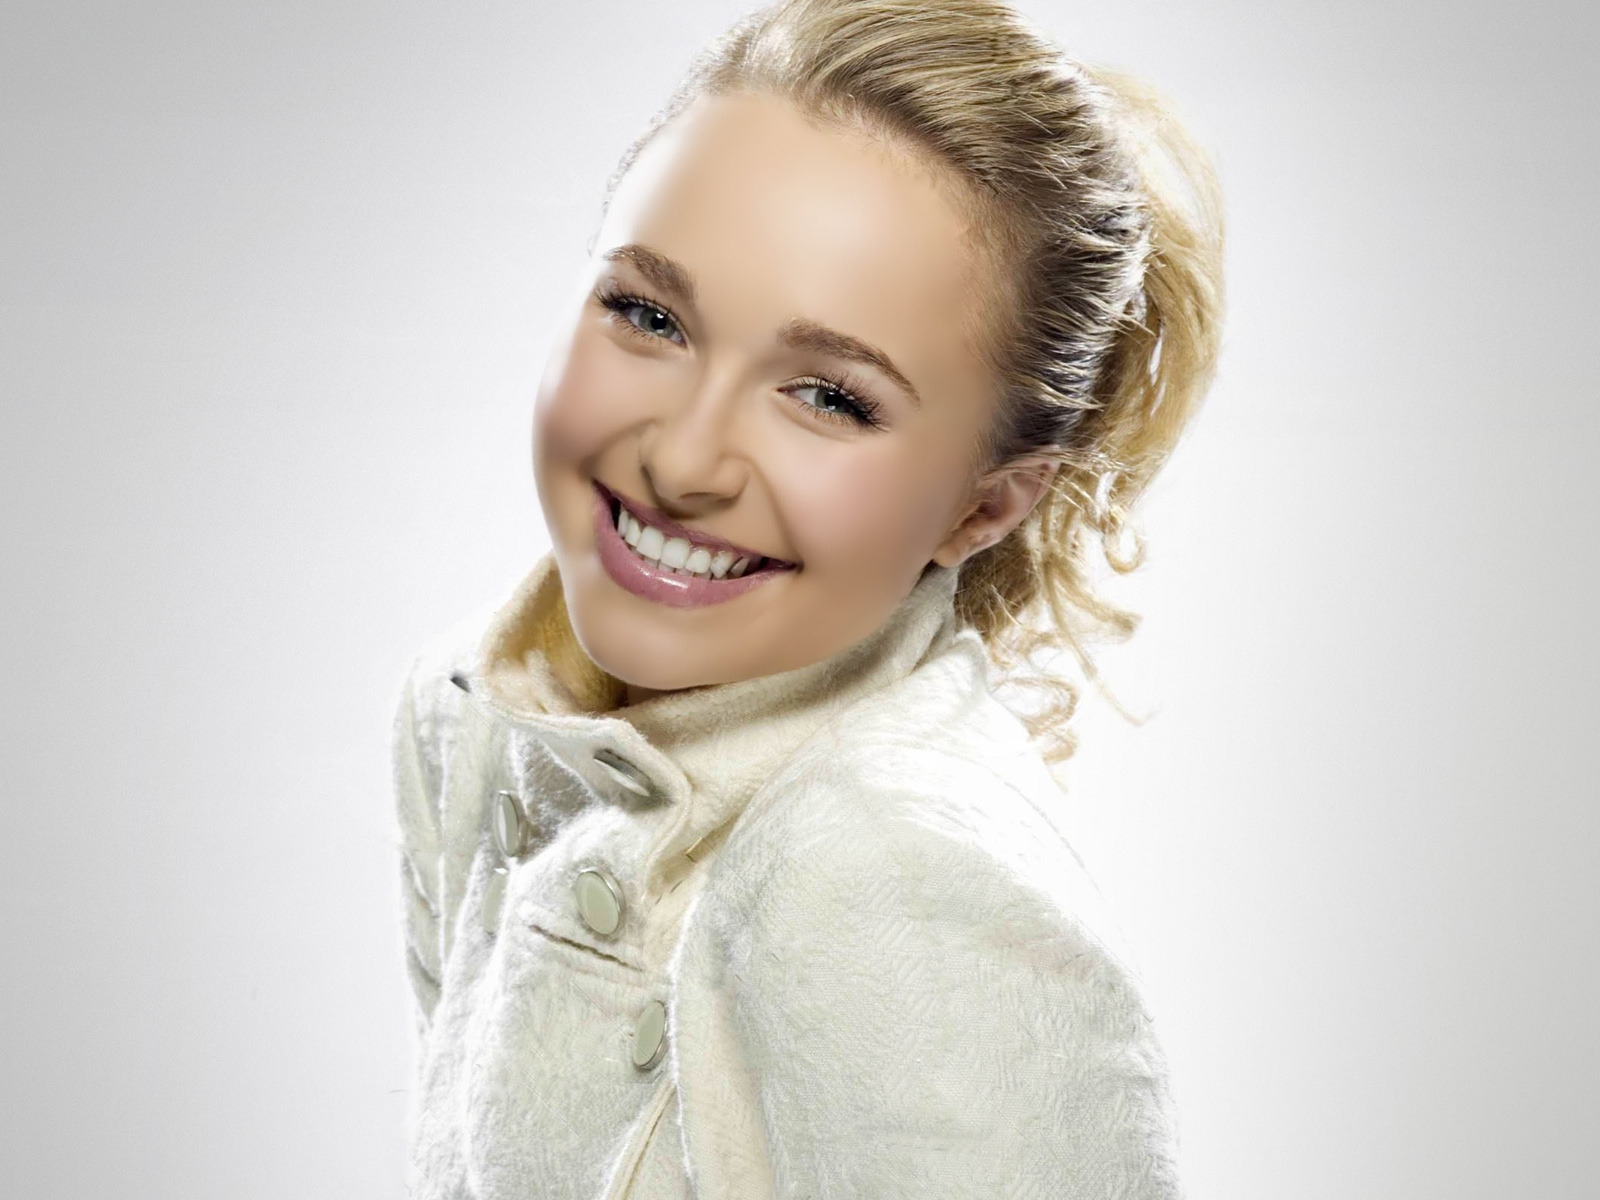 Hayden Panettiere Cute Smile for 1600 x 1200 resolution